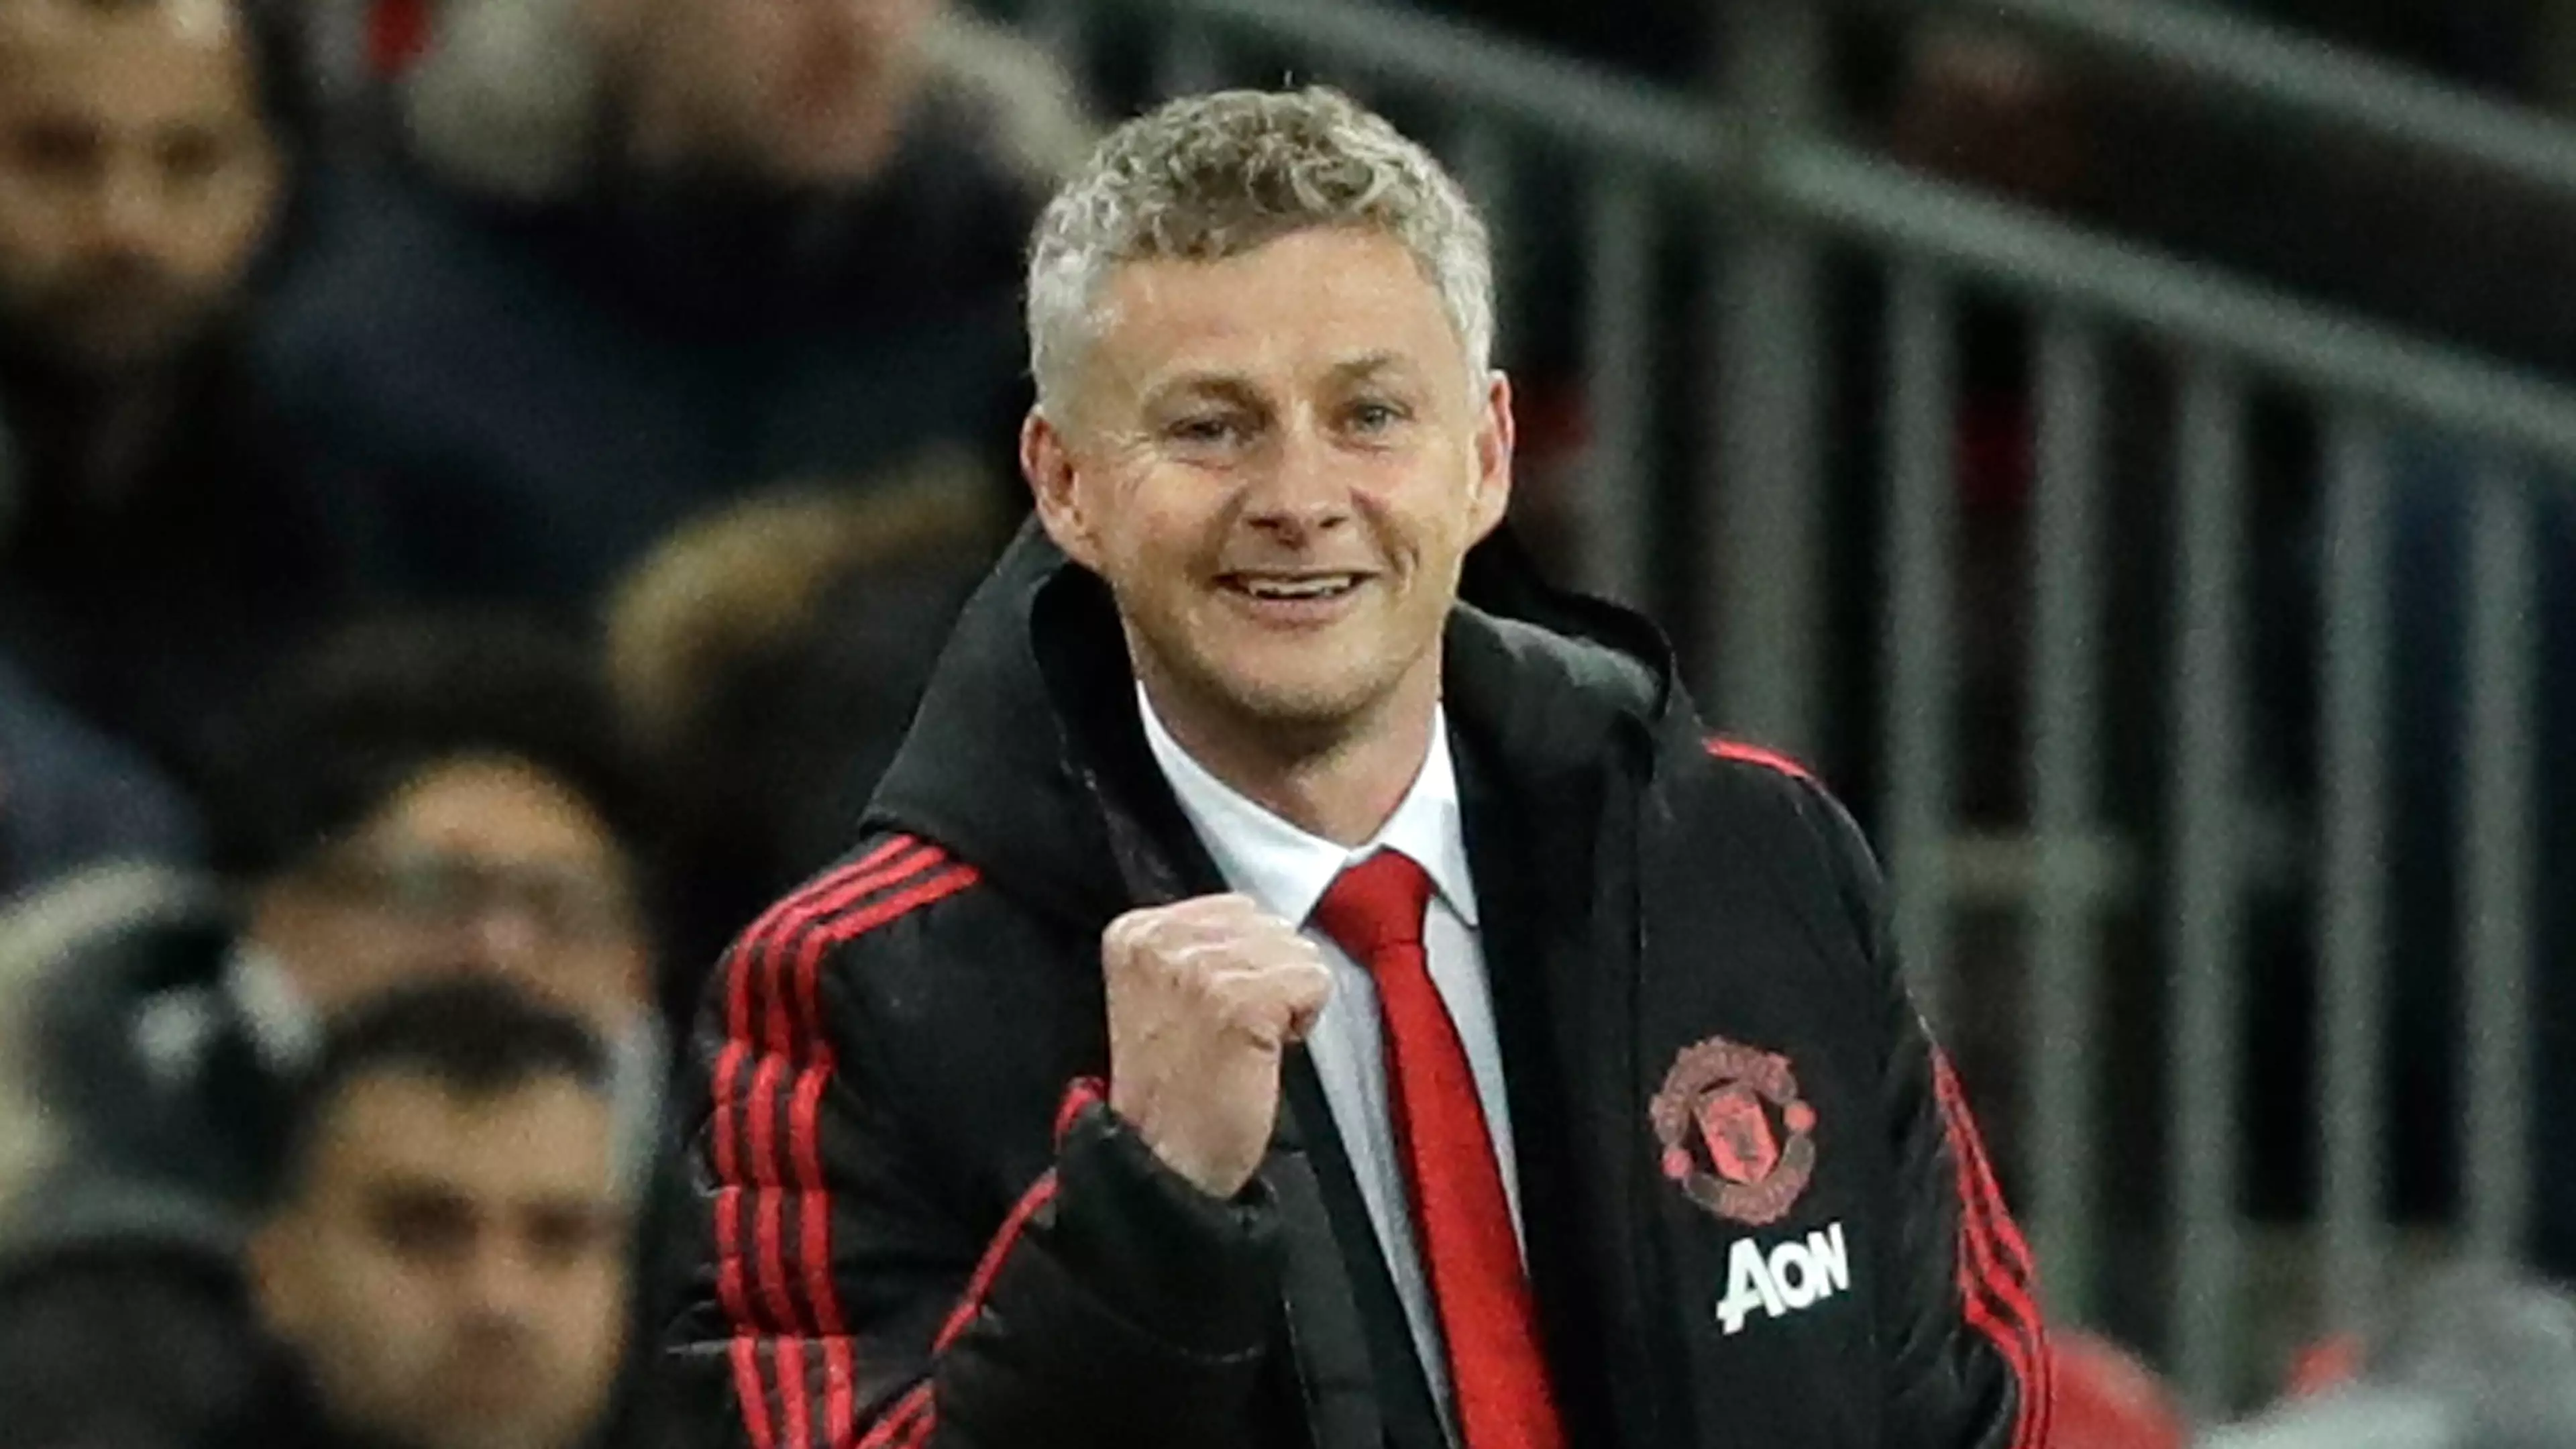 Solskjaer is already adored at United. Image: PA Images